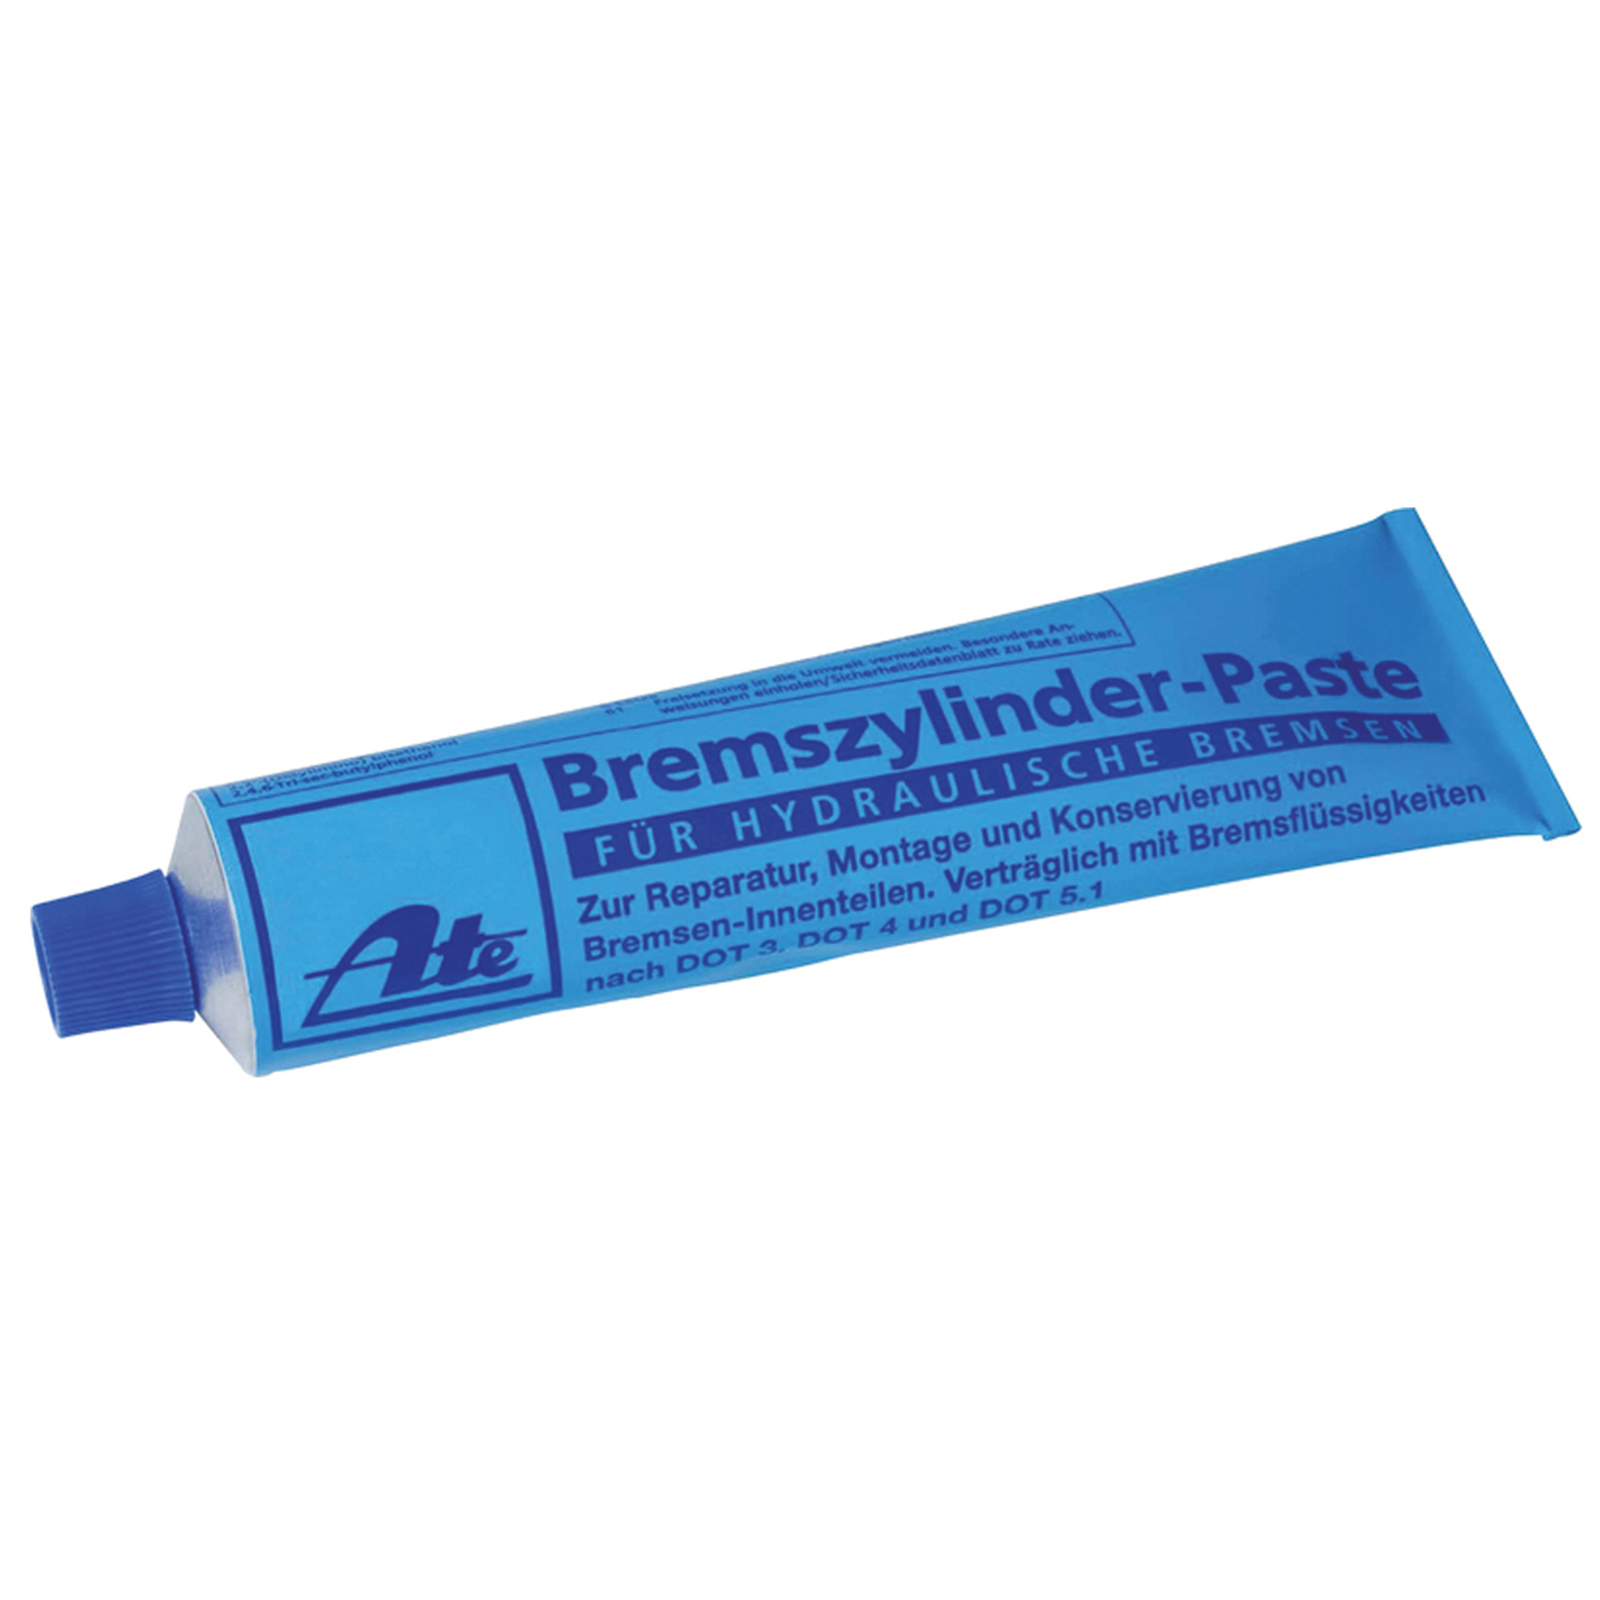 Brake Cylinder Paste - 180g - Fully Synthetic Brake Cylinder Paste for  Hydraulic Brake Systems For Lubrication of Cylinder Raceways and Pistons